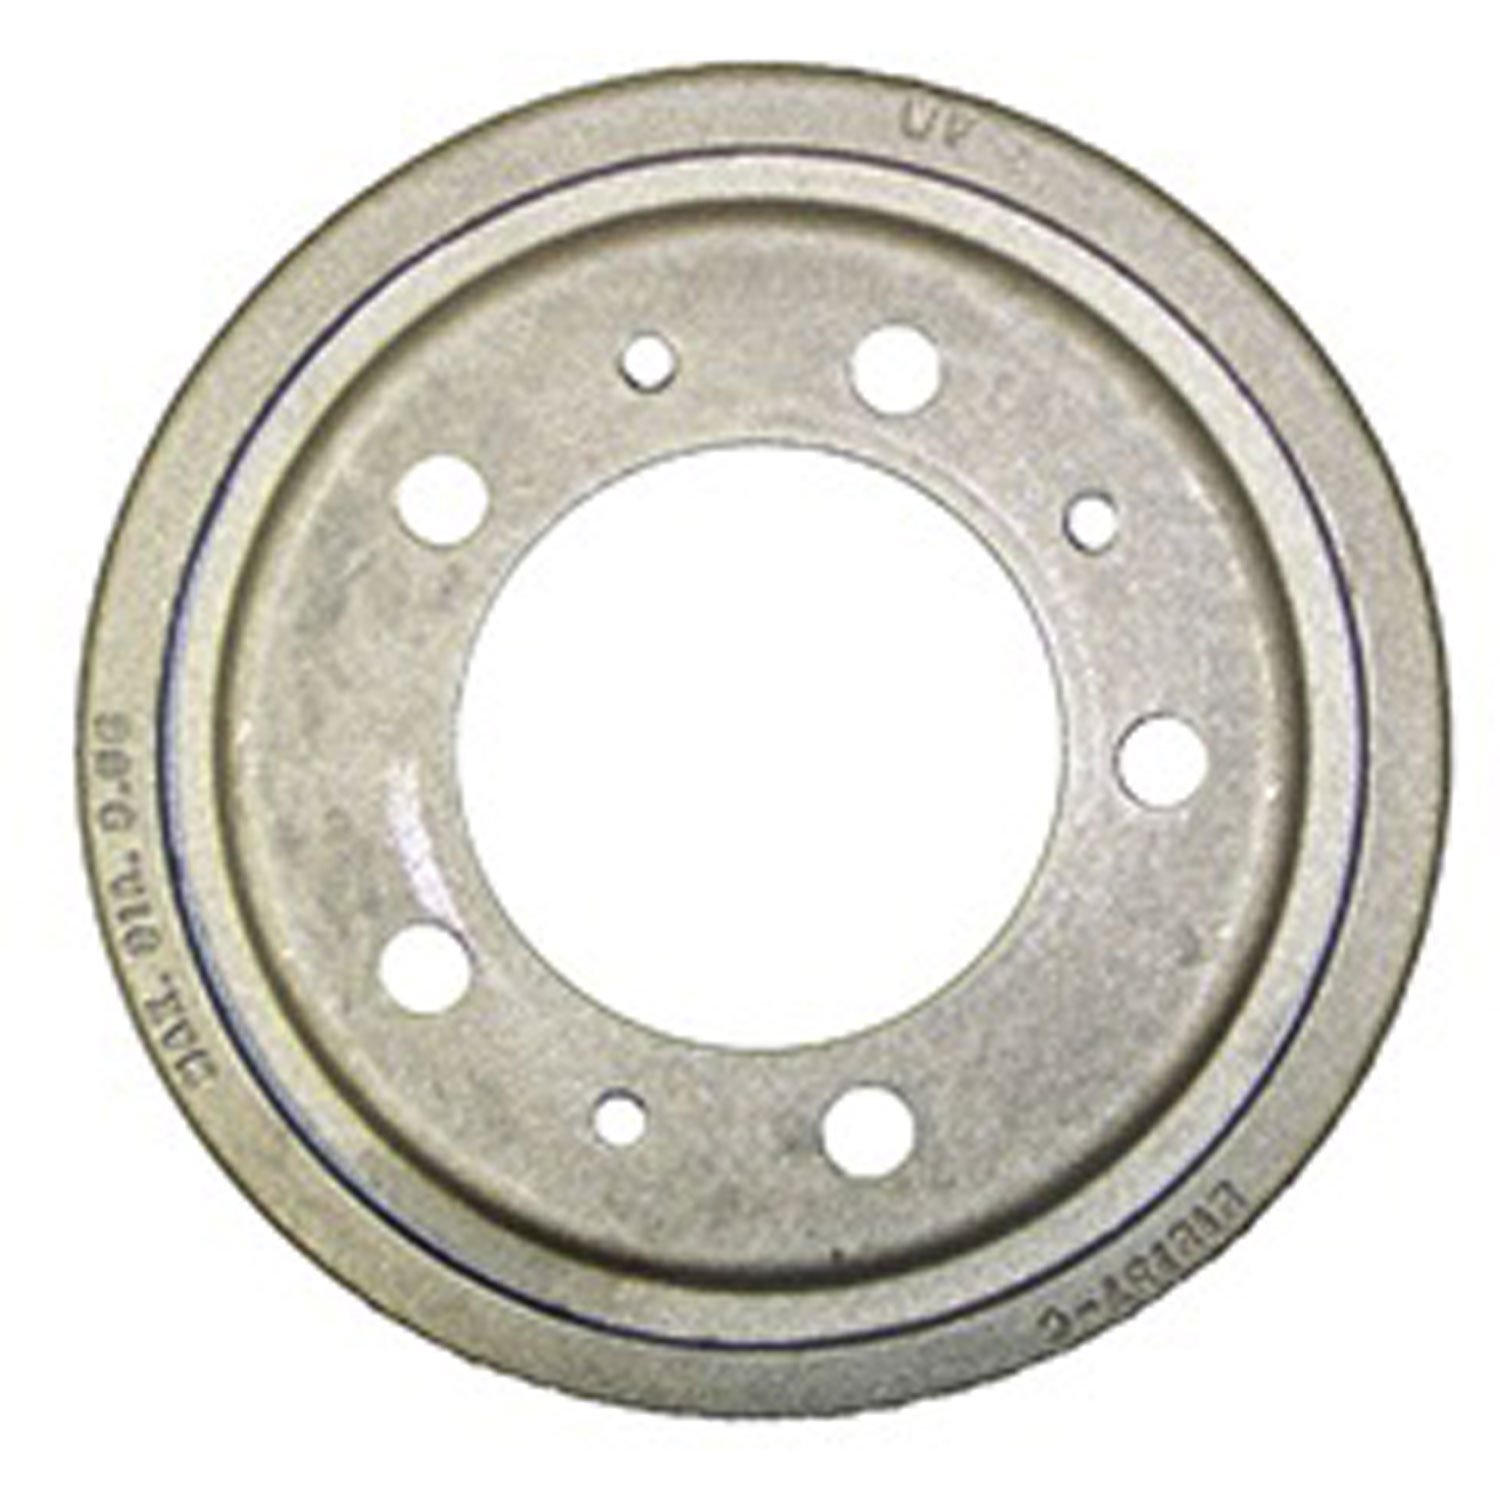 Factory-style replacement 9 inch x 1.75 inch brake